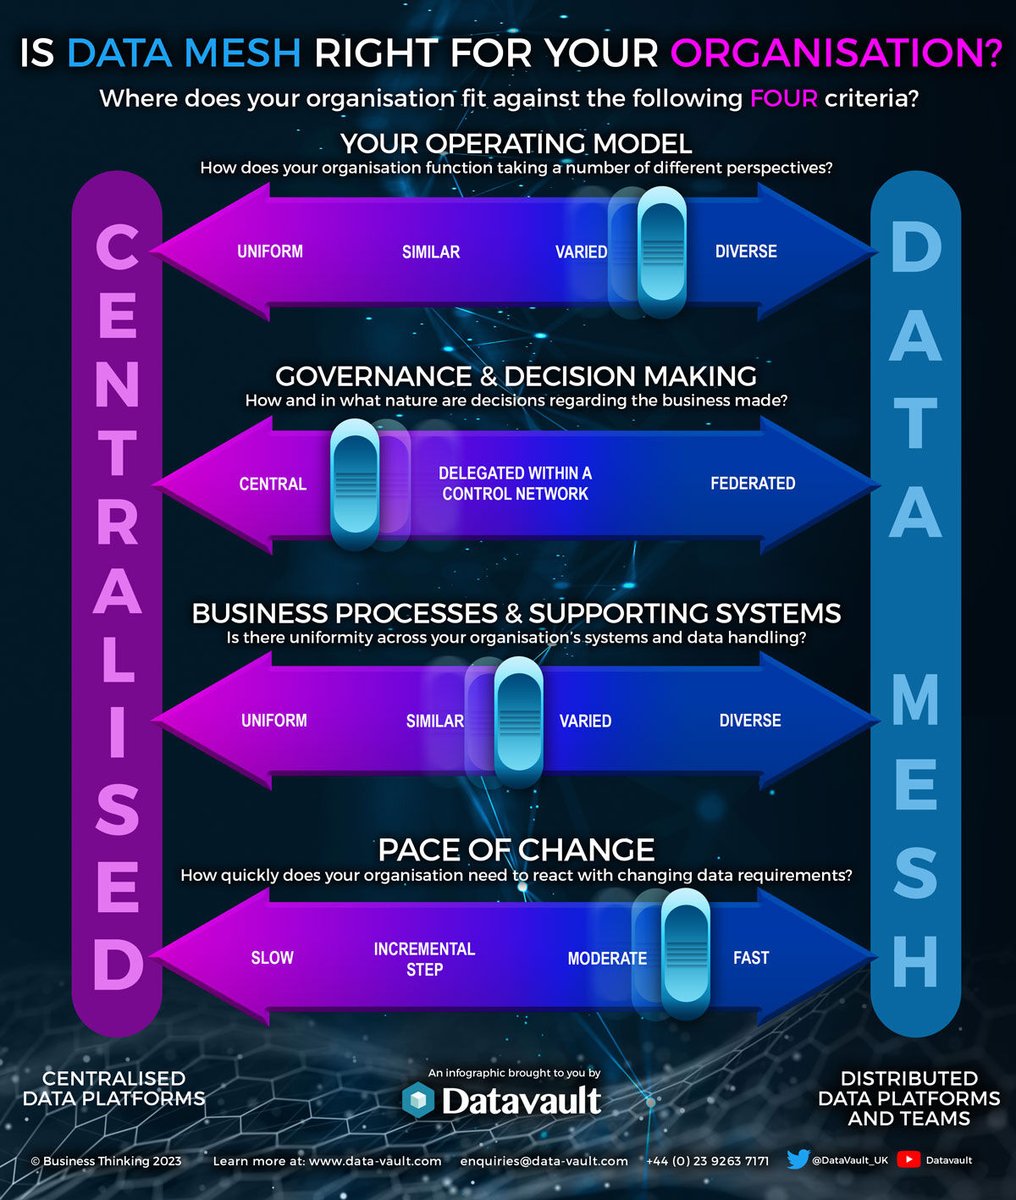 #DataMesh is a hot topic in the data world. Is Data Mesh right for your organisation? - Data Vault have published an #Infographic which helps #Organisations see if their #OperatingModel can make the transition to Data Mesh - Read here bit.ly/3O0viq4 #CIO #DataAnalytics